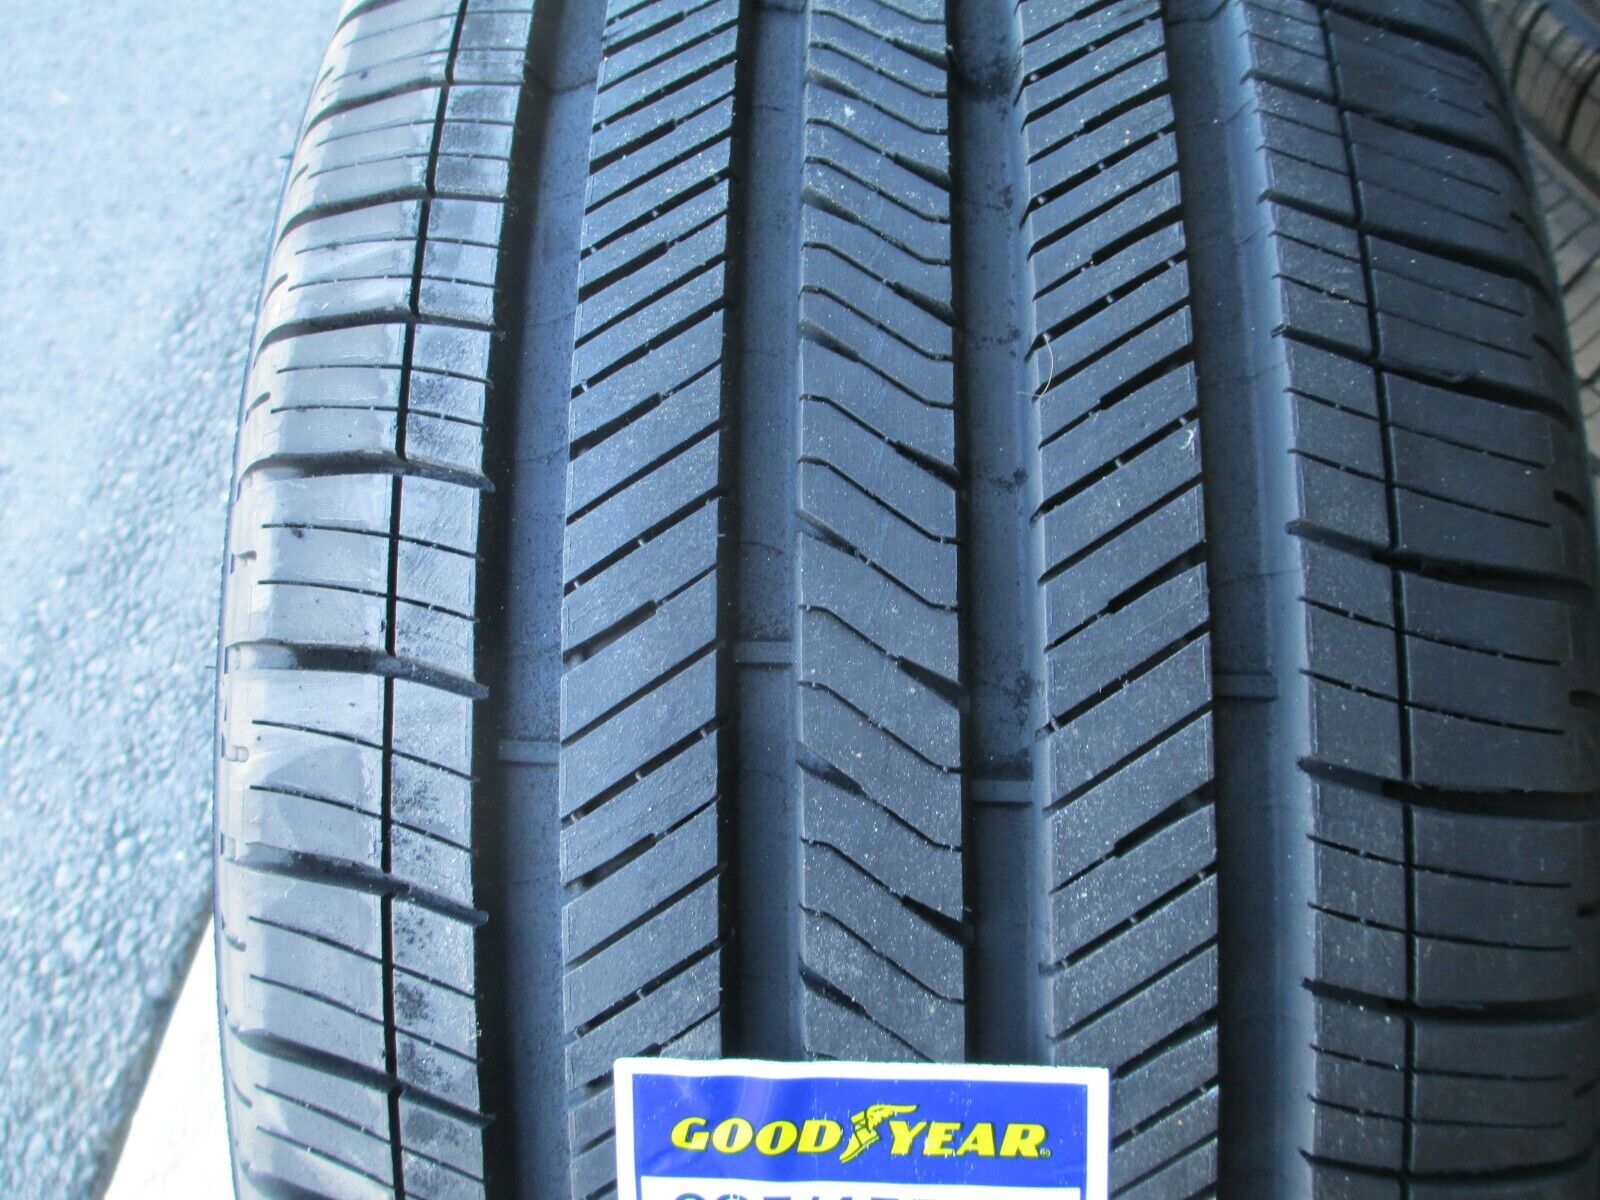 2 New 285/45R22 Goodyear Eagle Touring Tires 2854522 45 22 R22 45R Made in USA